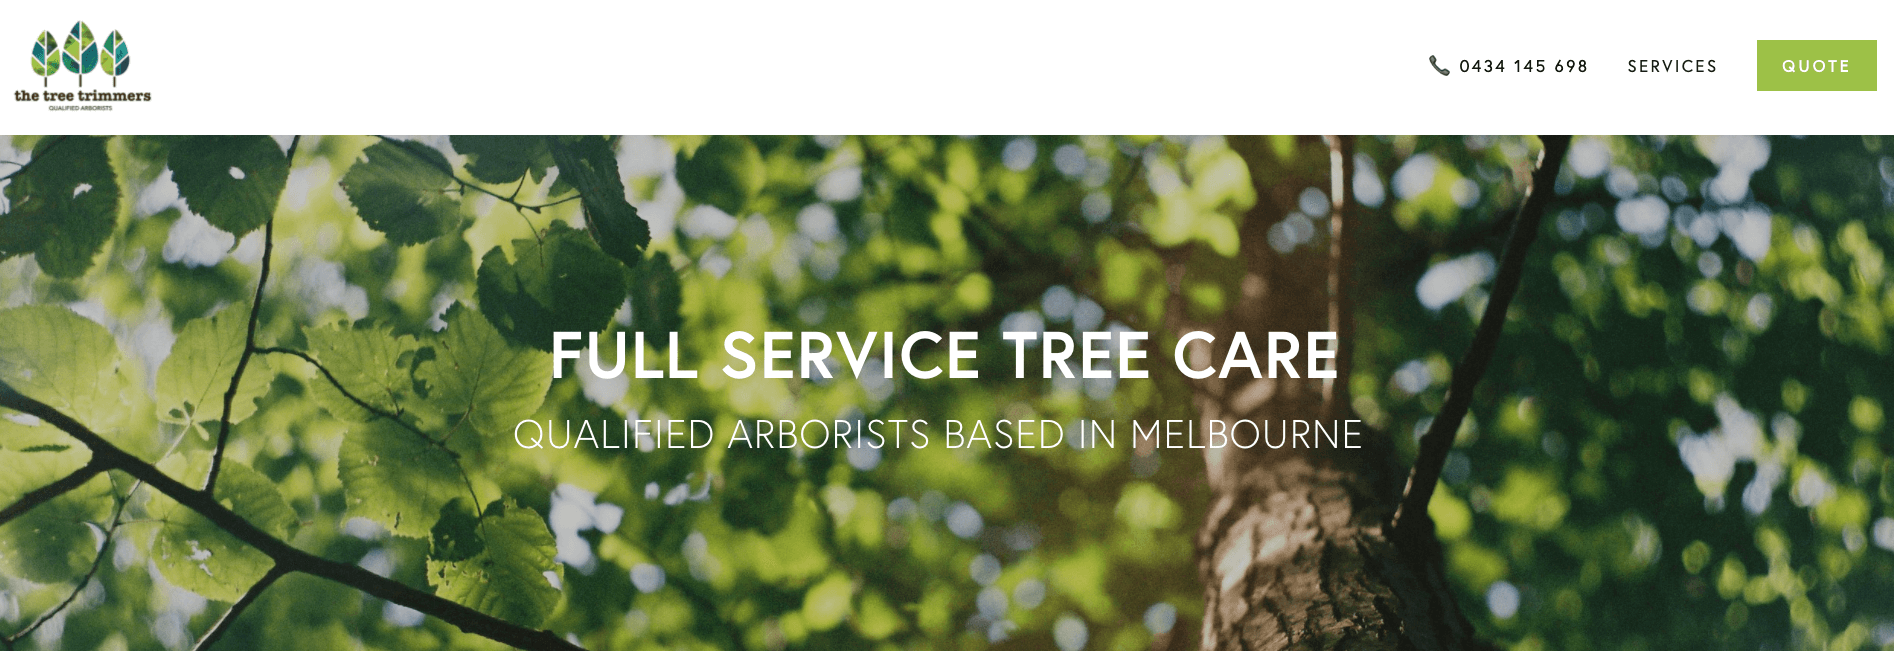 the tree trimmers melbourne